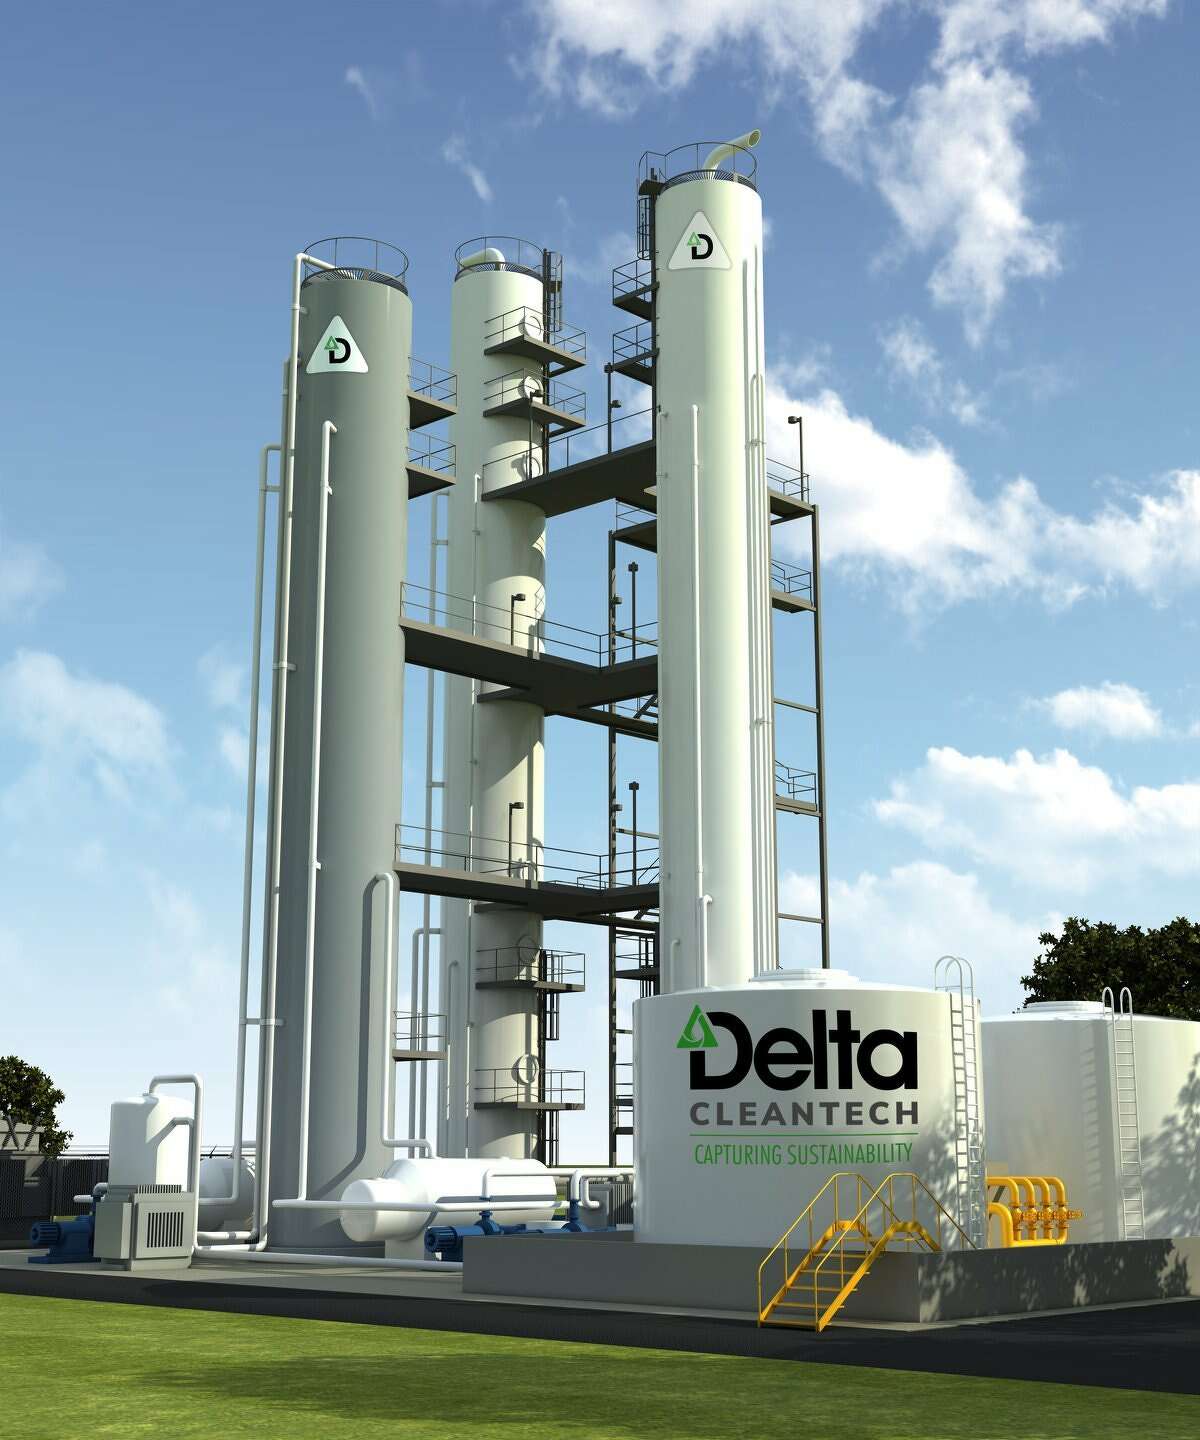 Carbon capture and sequestration must also include utilization, says Delta CleanTech, a Canadian company working along the Gulf Coast to capture CO2, purify it and ultimately make it available for use.